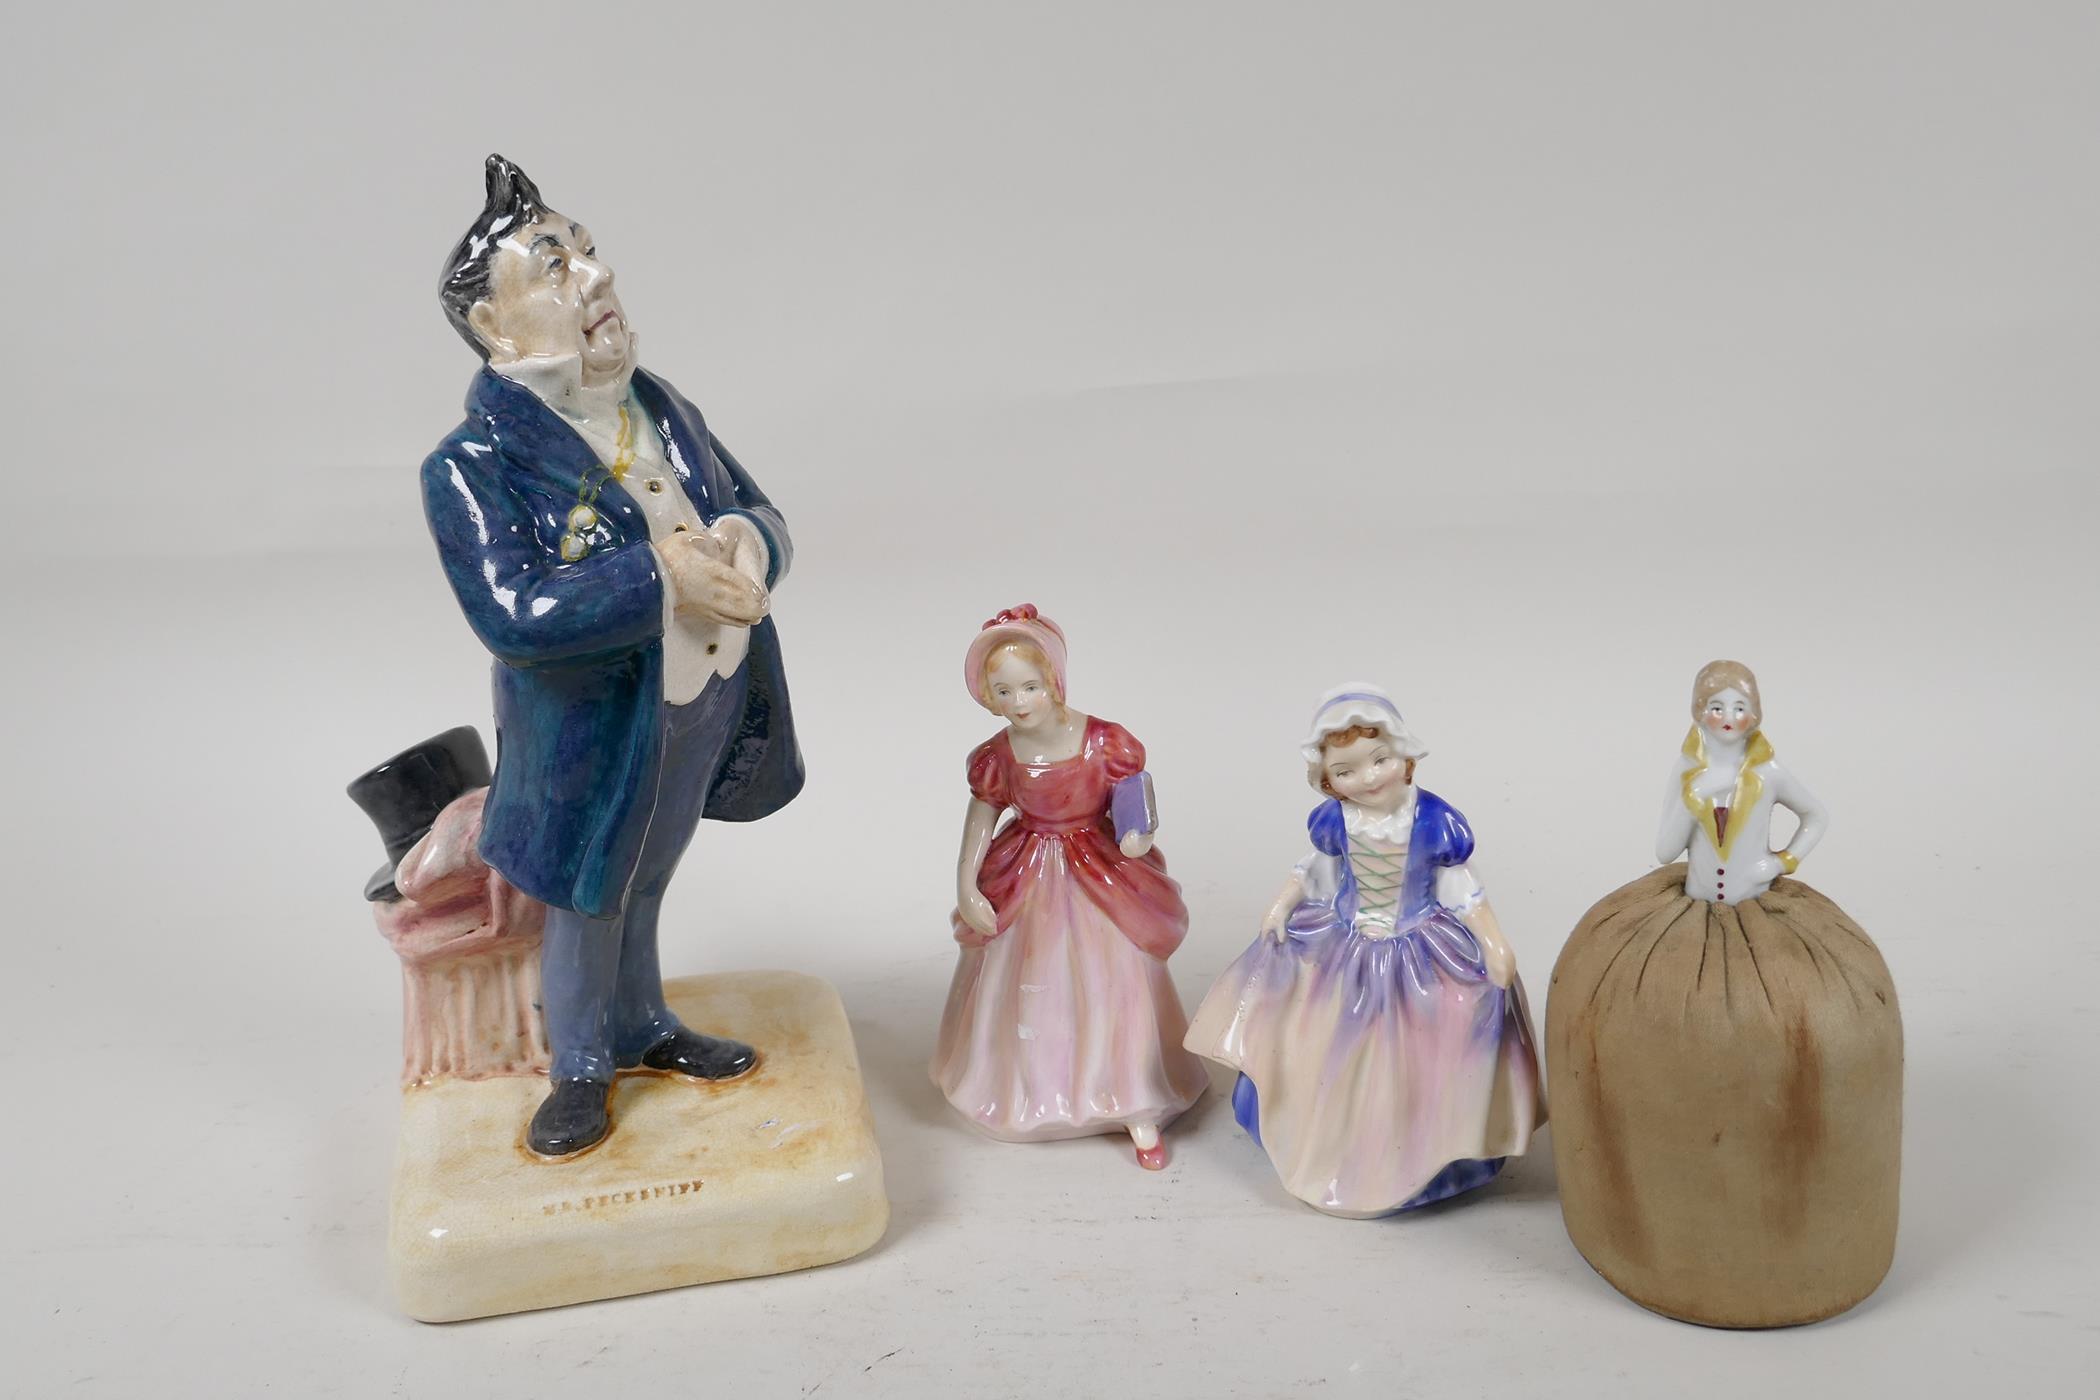 A Bretby Pottery Dickens character, 'Mr Pecksniff', 9" high, together with a Paragon pottery figure,